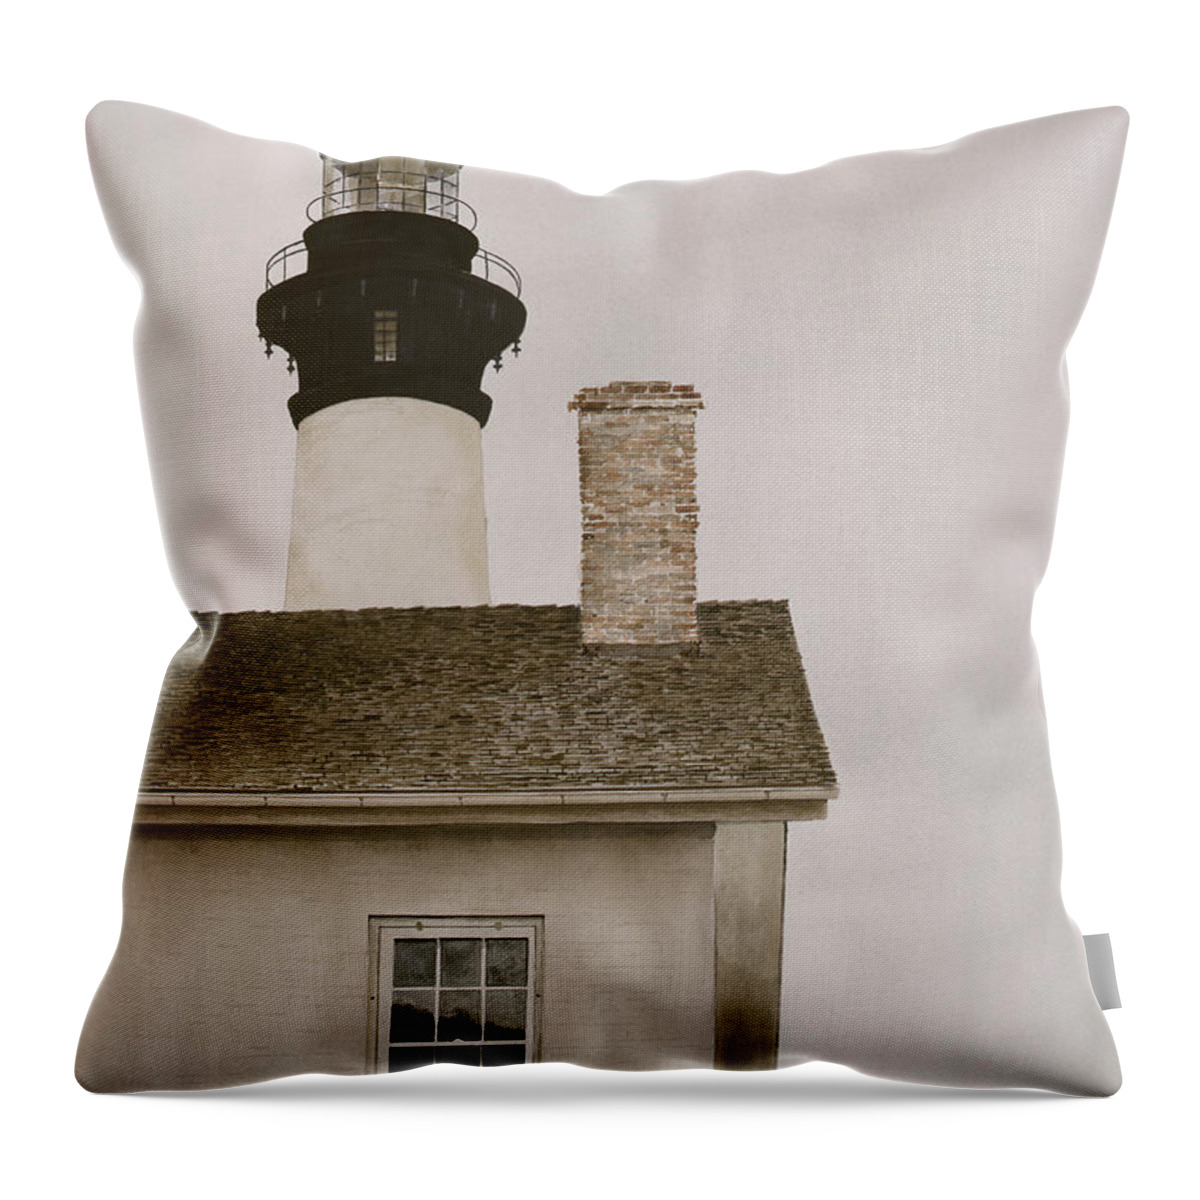 The Outer Banks Of North Carolina Is The Home Of This Majestic Old Lighthouse.  Throw Pillow featuring the painting Reflections At Bodie Light by Monte Toon